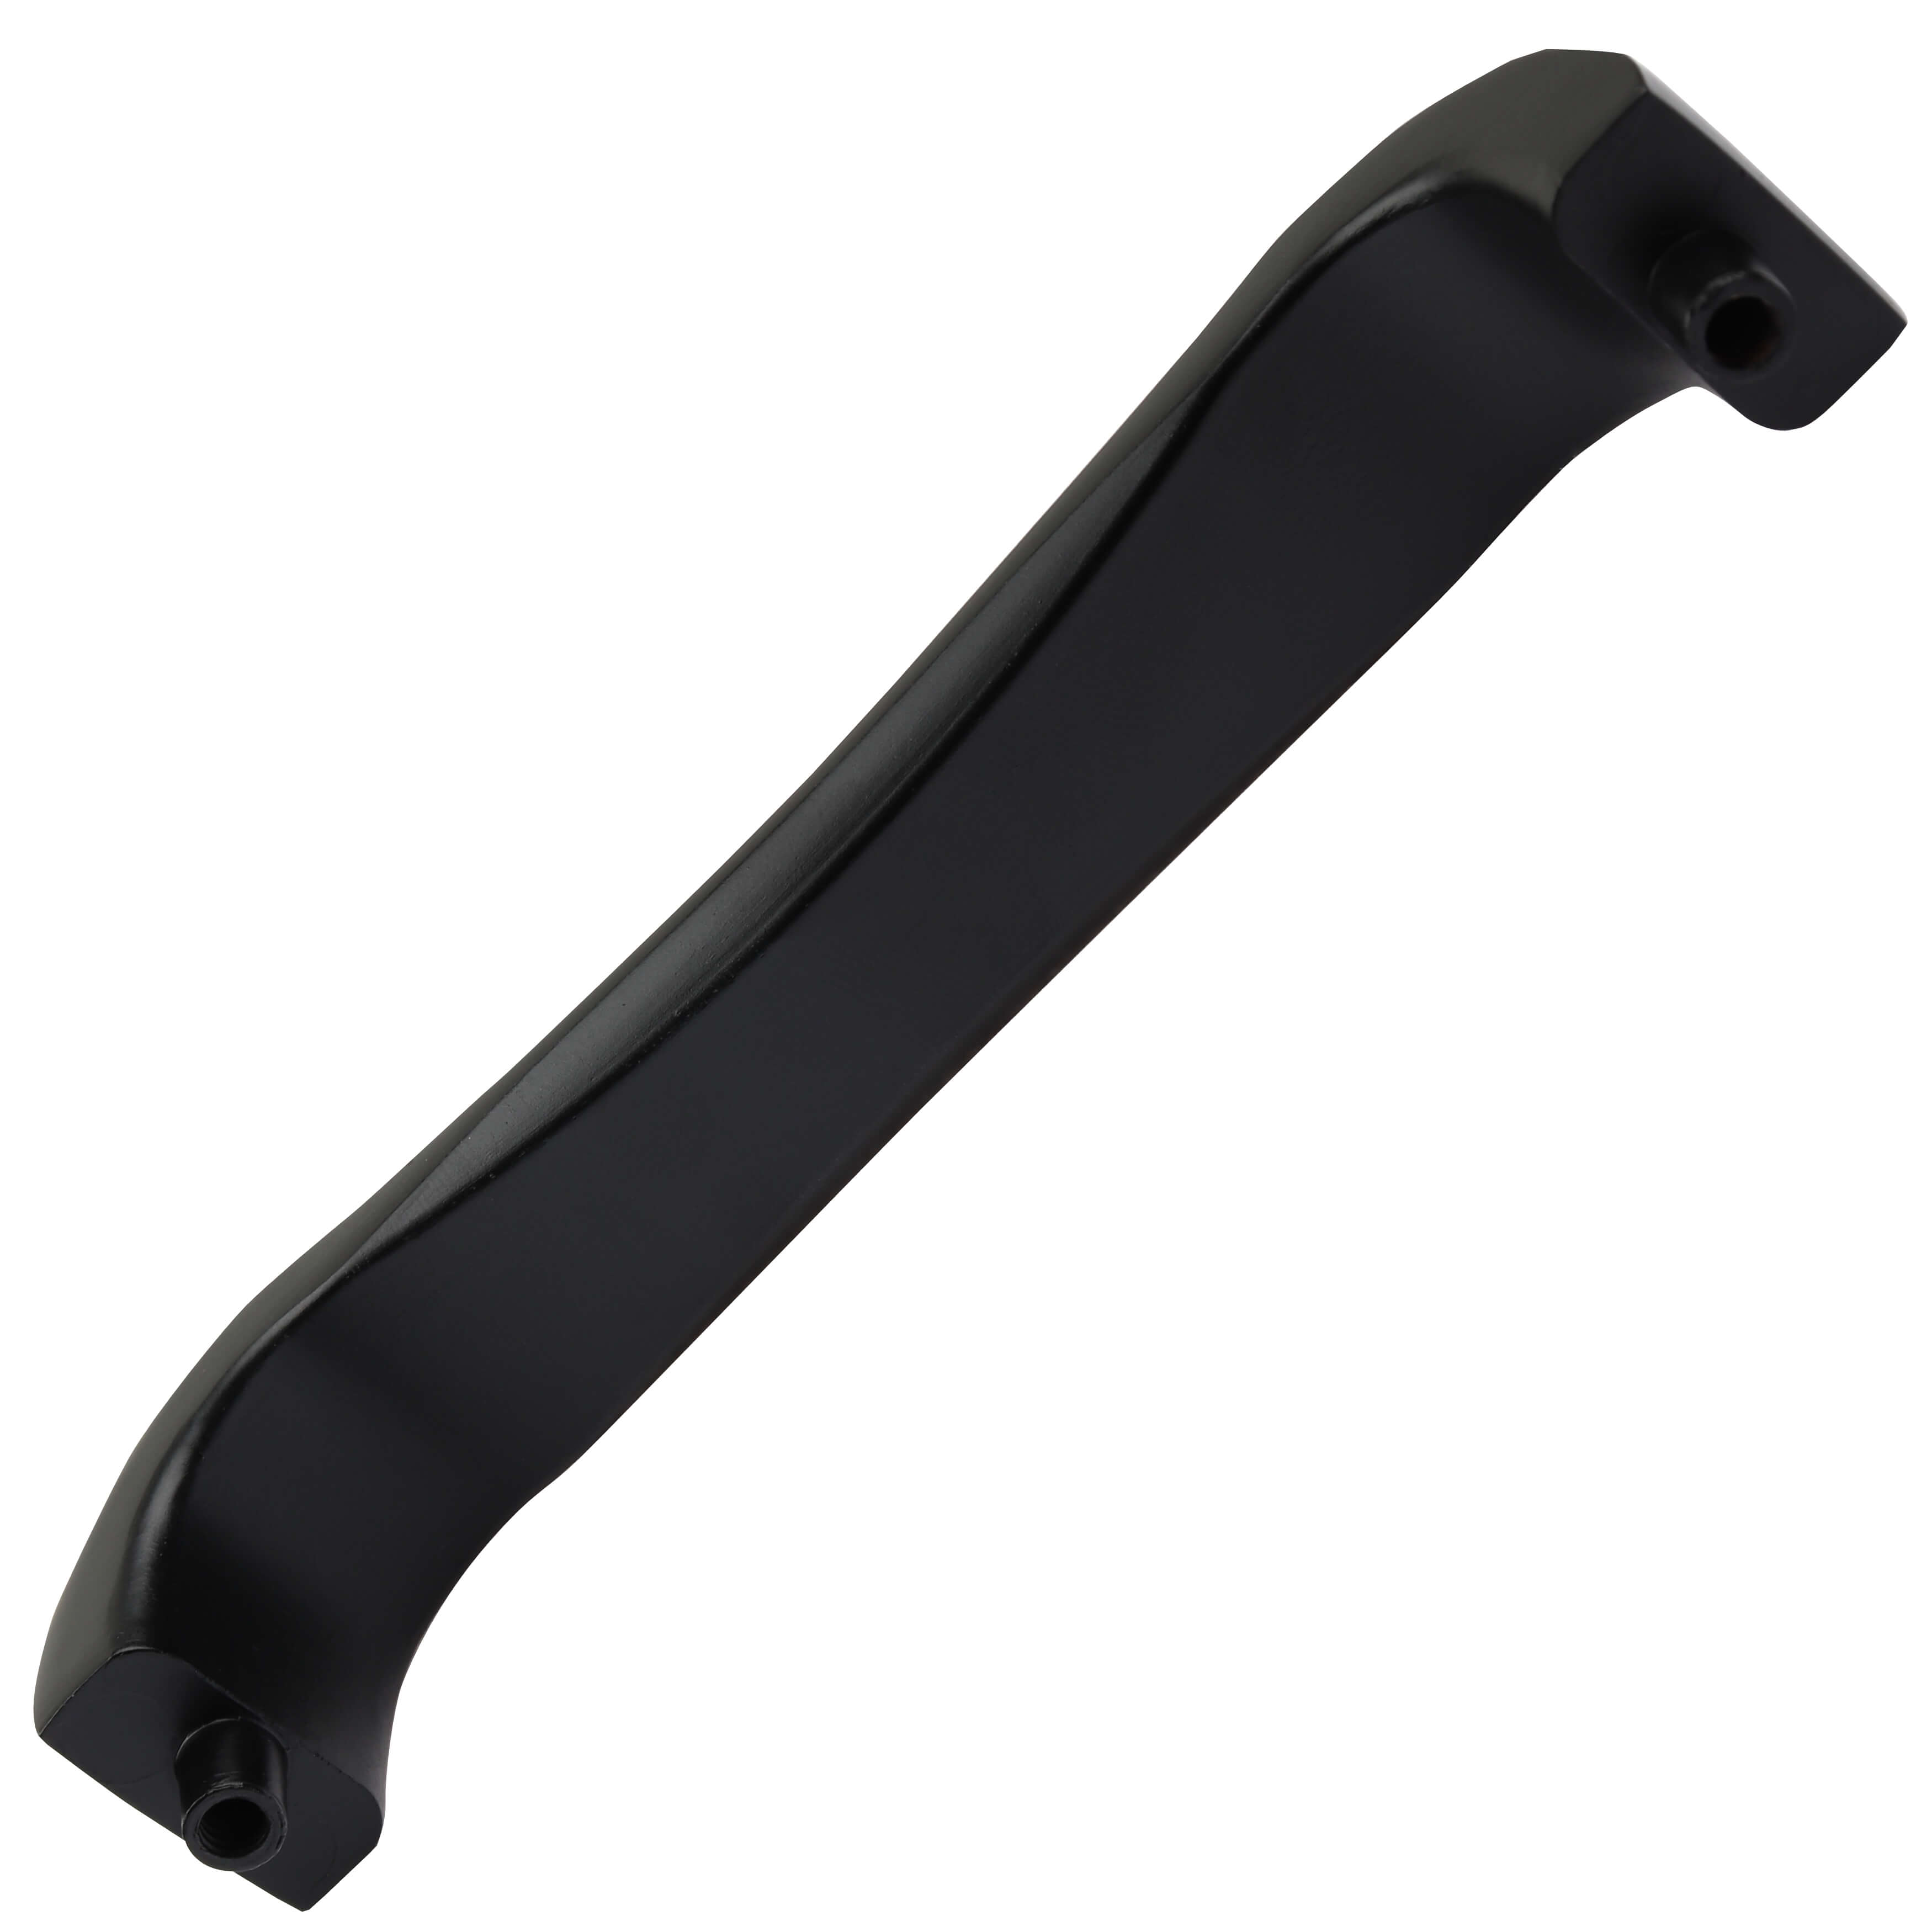 4-1/2 in. Center Smooth Curved Flat Cabinet Pull Handles, Matte Black, Pack of 5 - image 3 of 3